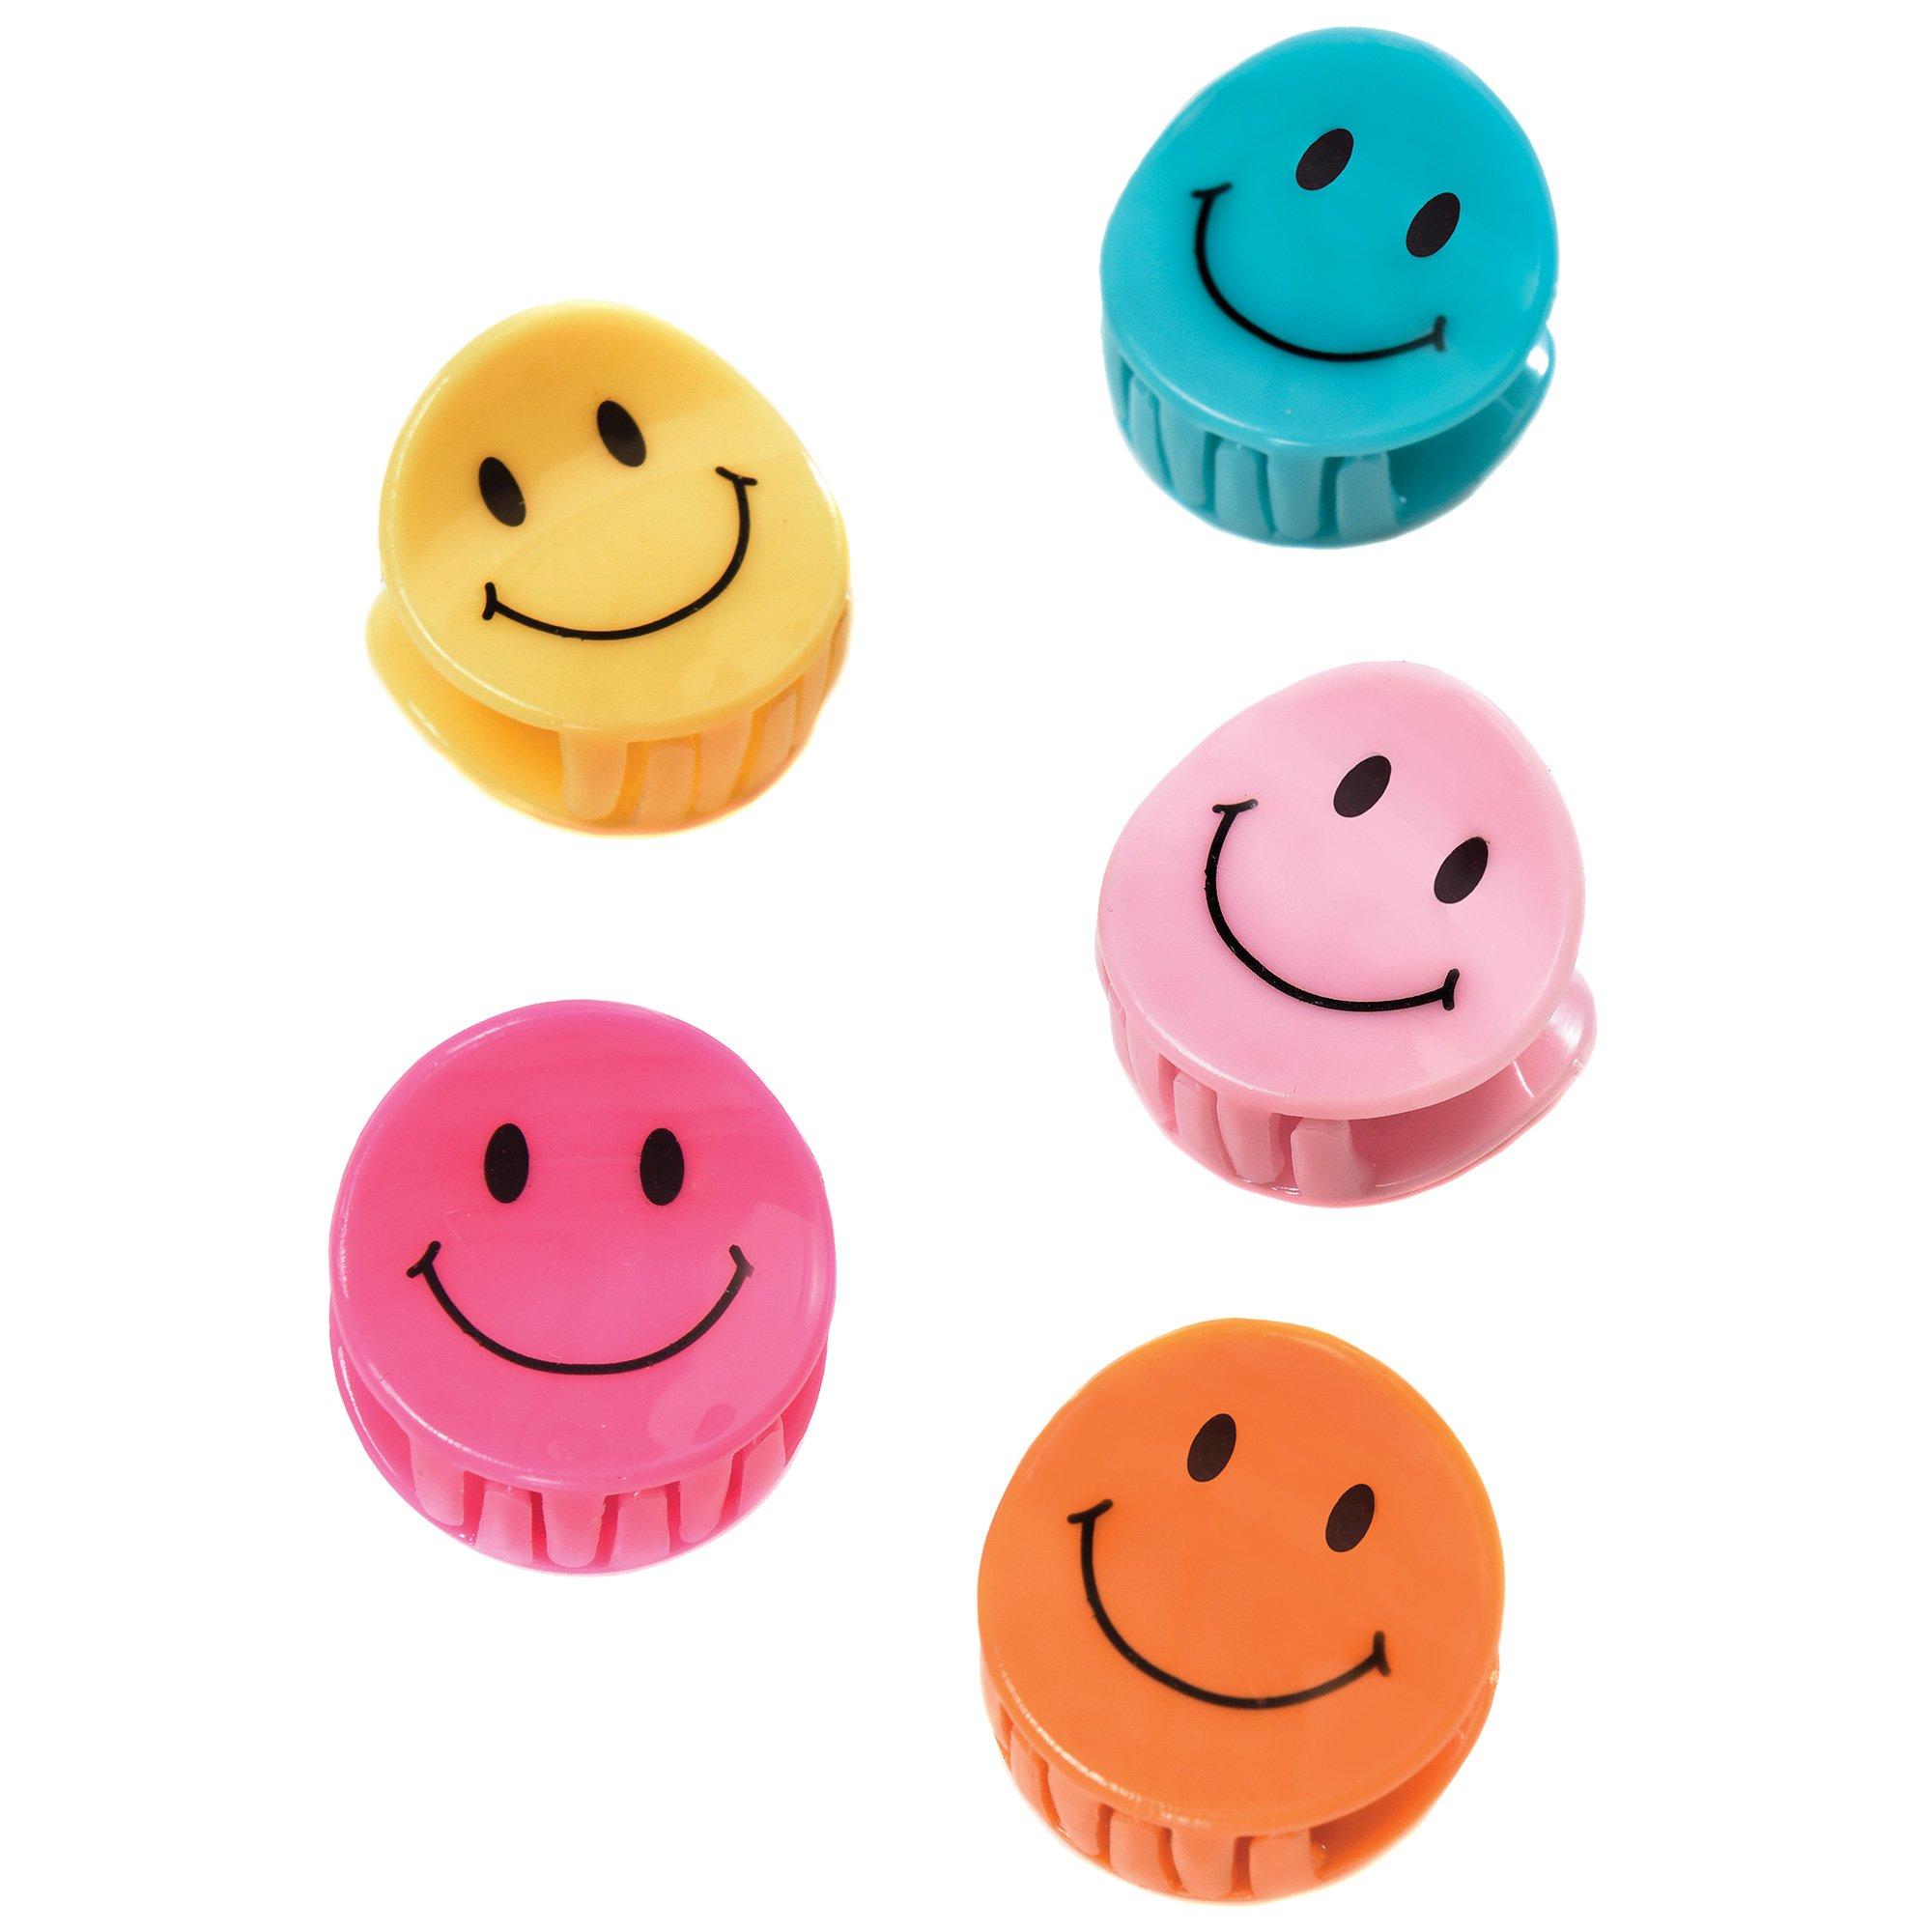 Multicolor Smiley Hairclips, 6ct